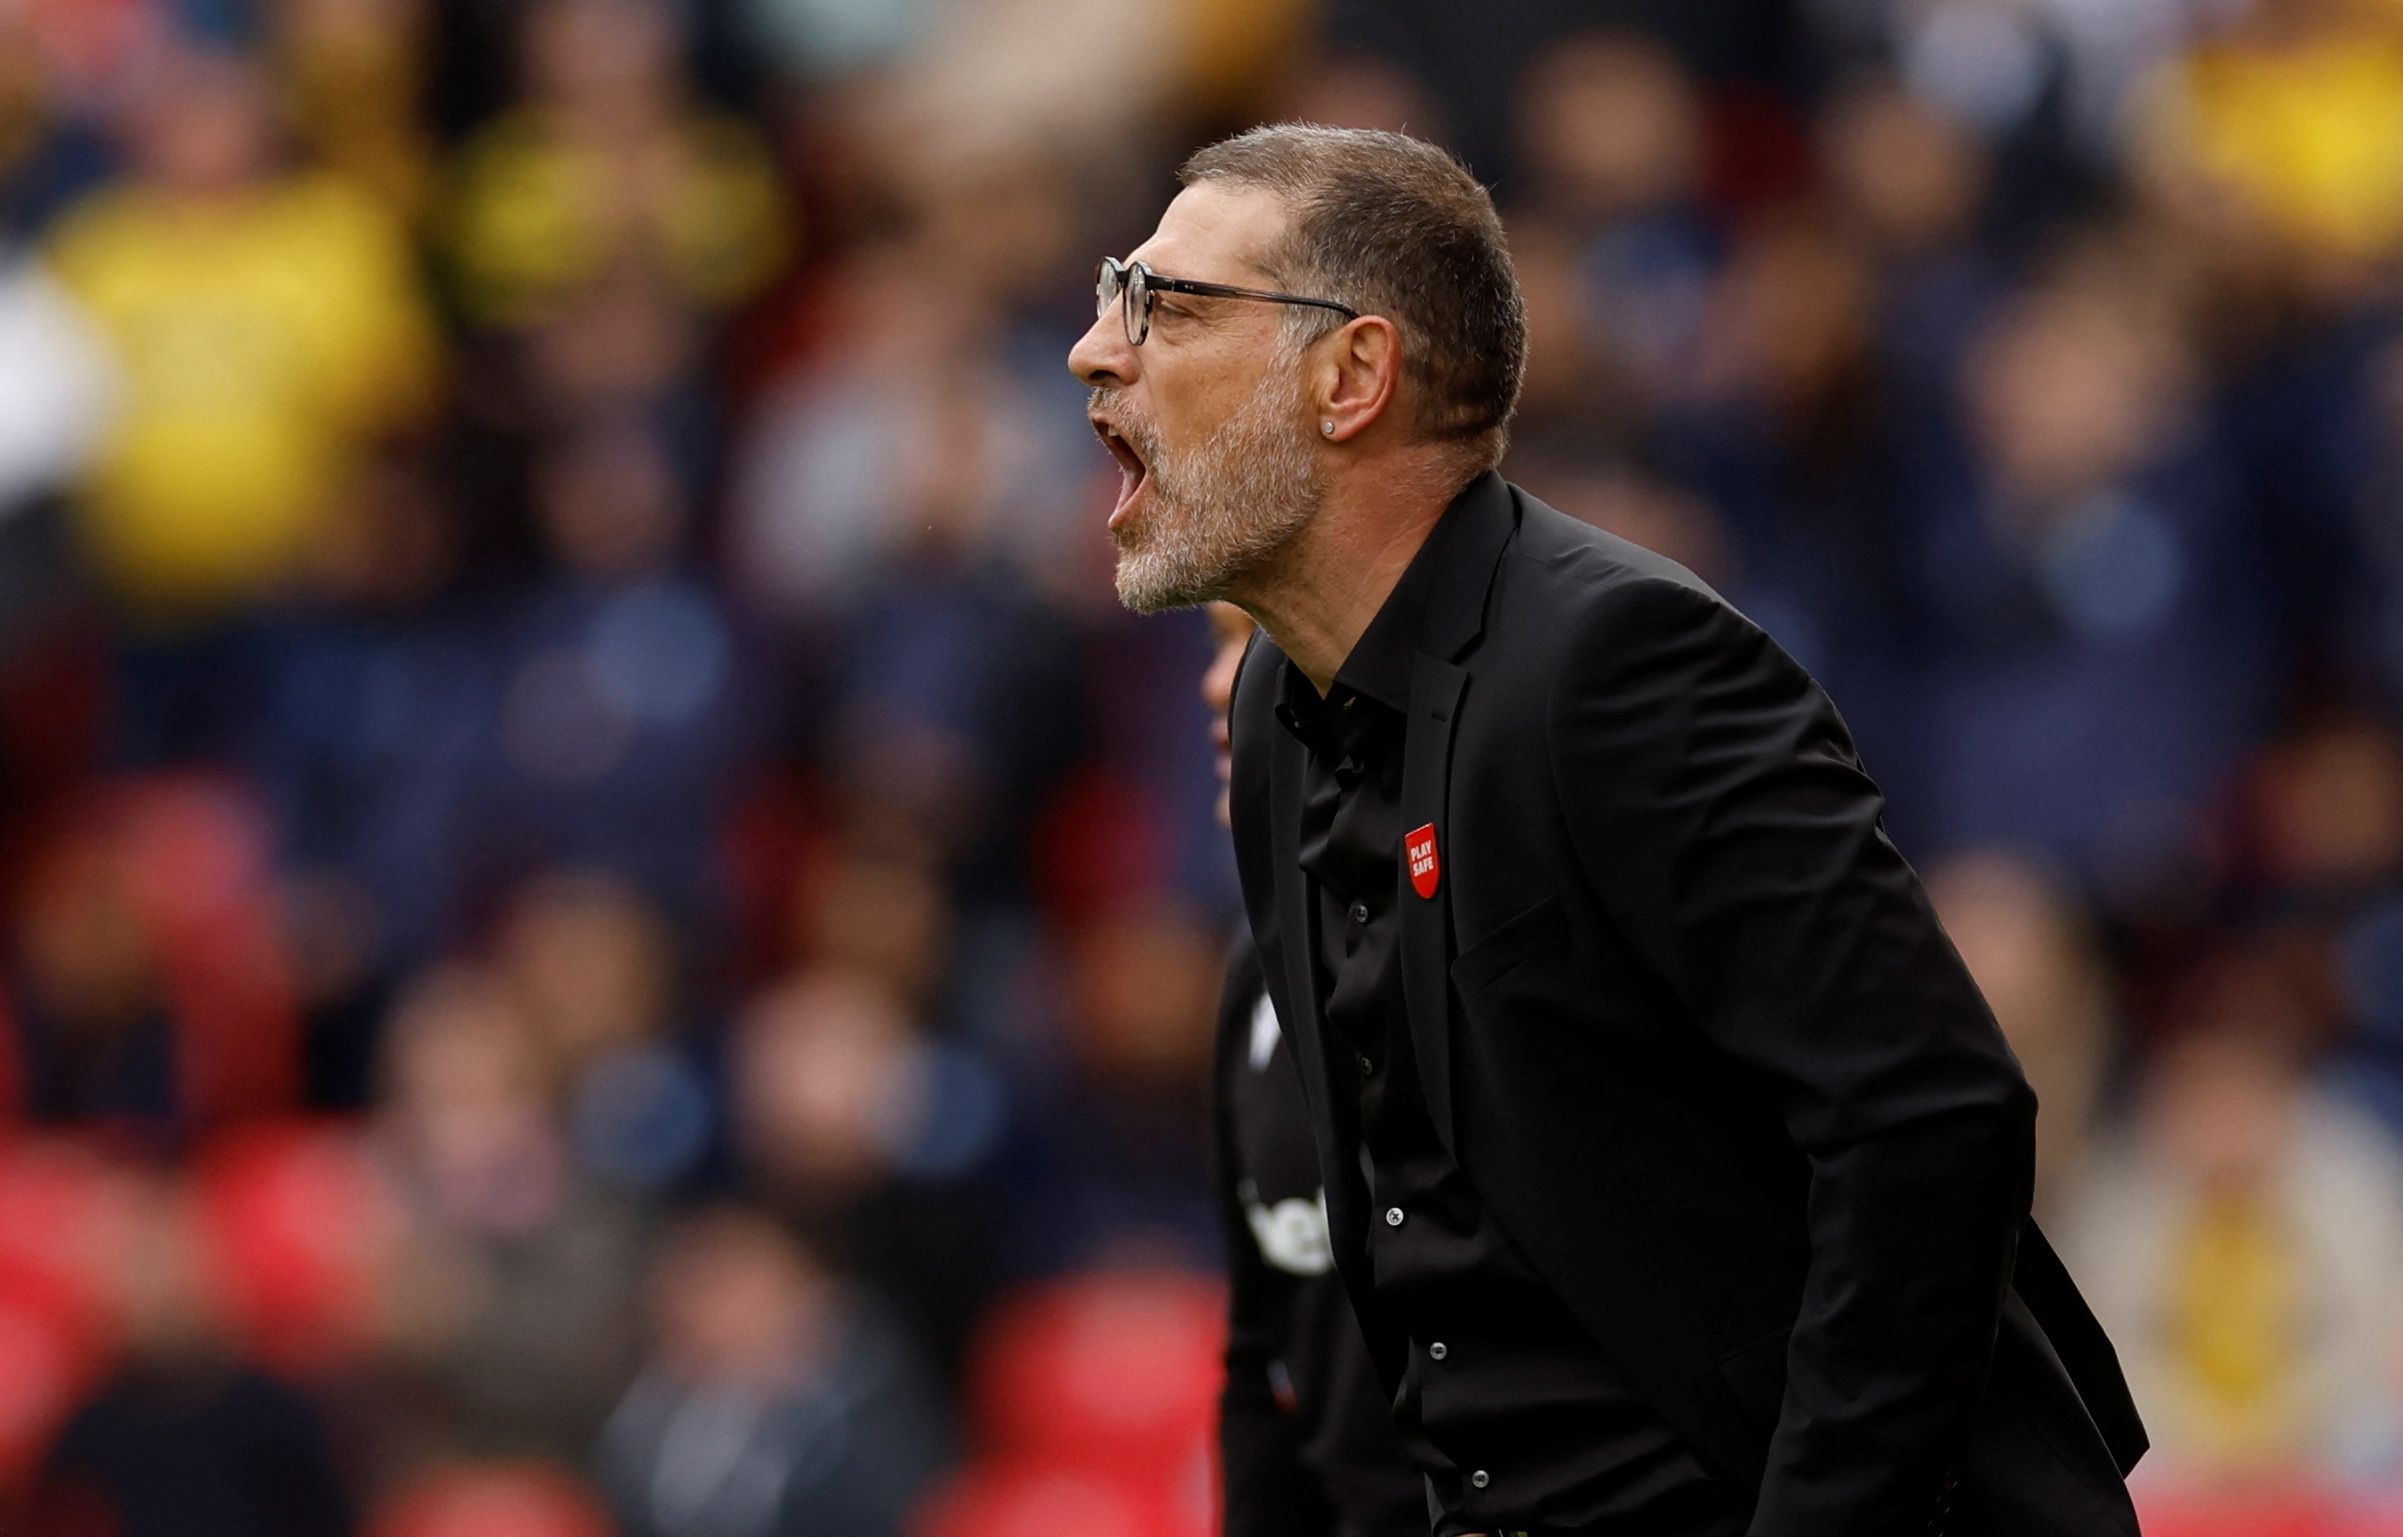 Soccer Football - Championship - Stoke City v Watford - bet365 Stadium, Stoke-on-Trent, Britain - October 2, 2022 Watford manager Slaven Bilic reacts Action Images/Jason Cairnduff  EDITORIAL USE ONLY. No use with unauthorized audio, video, data, fixture lists, club/league logos or 